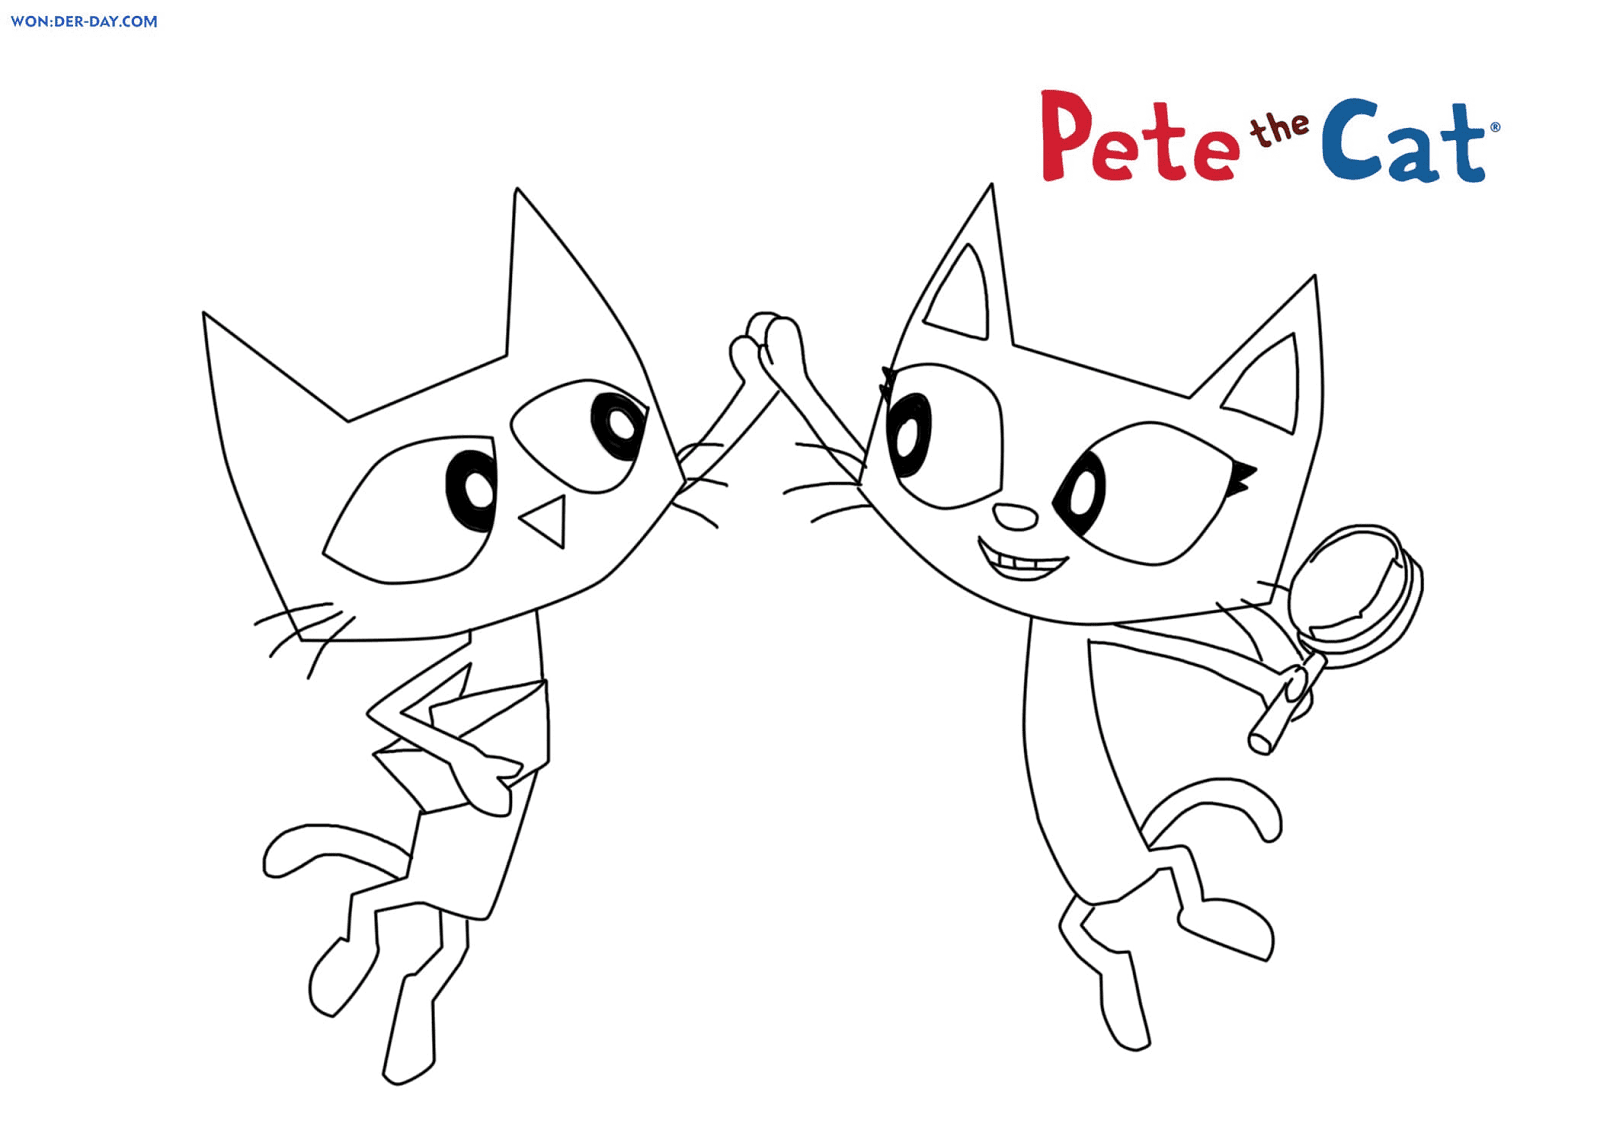 Pete the cat and Callie Coloring Pages